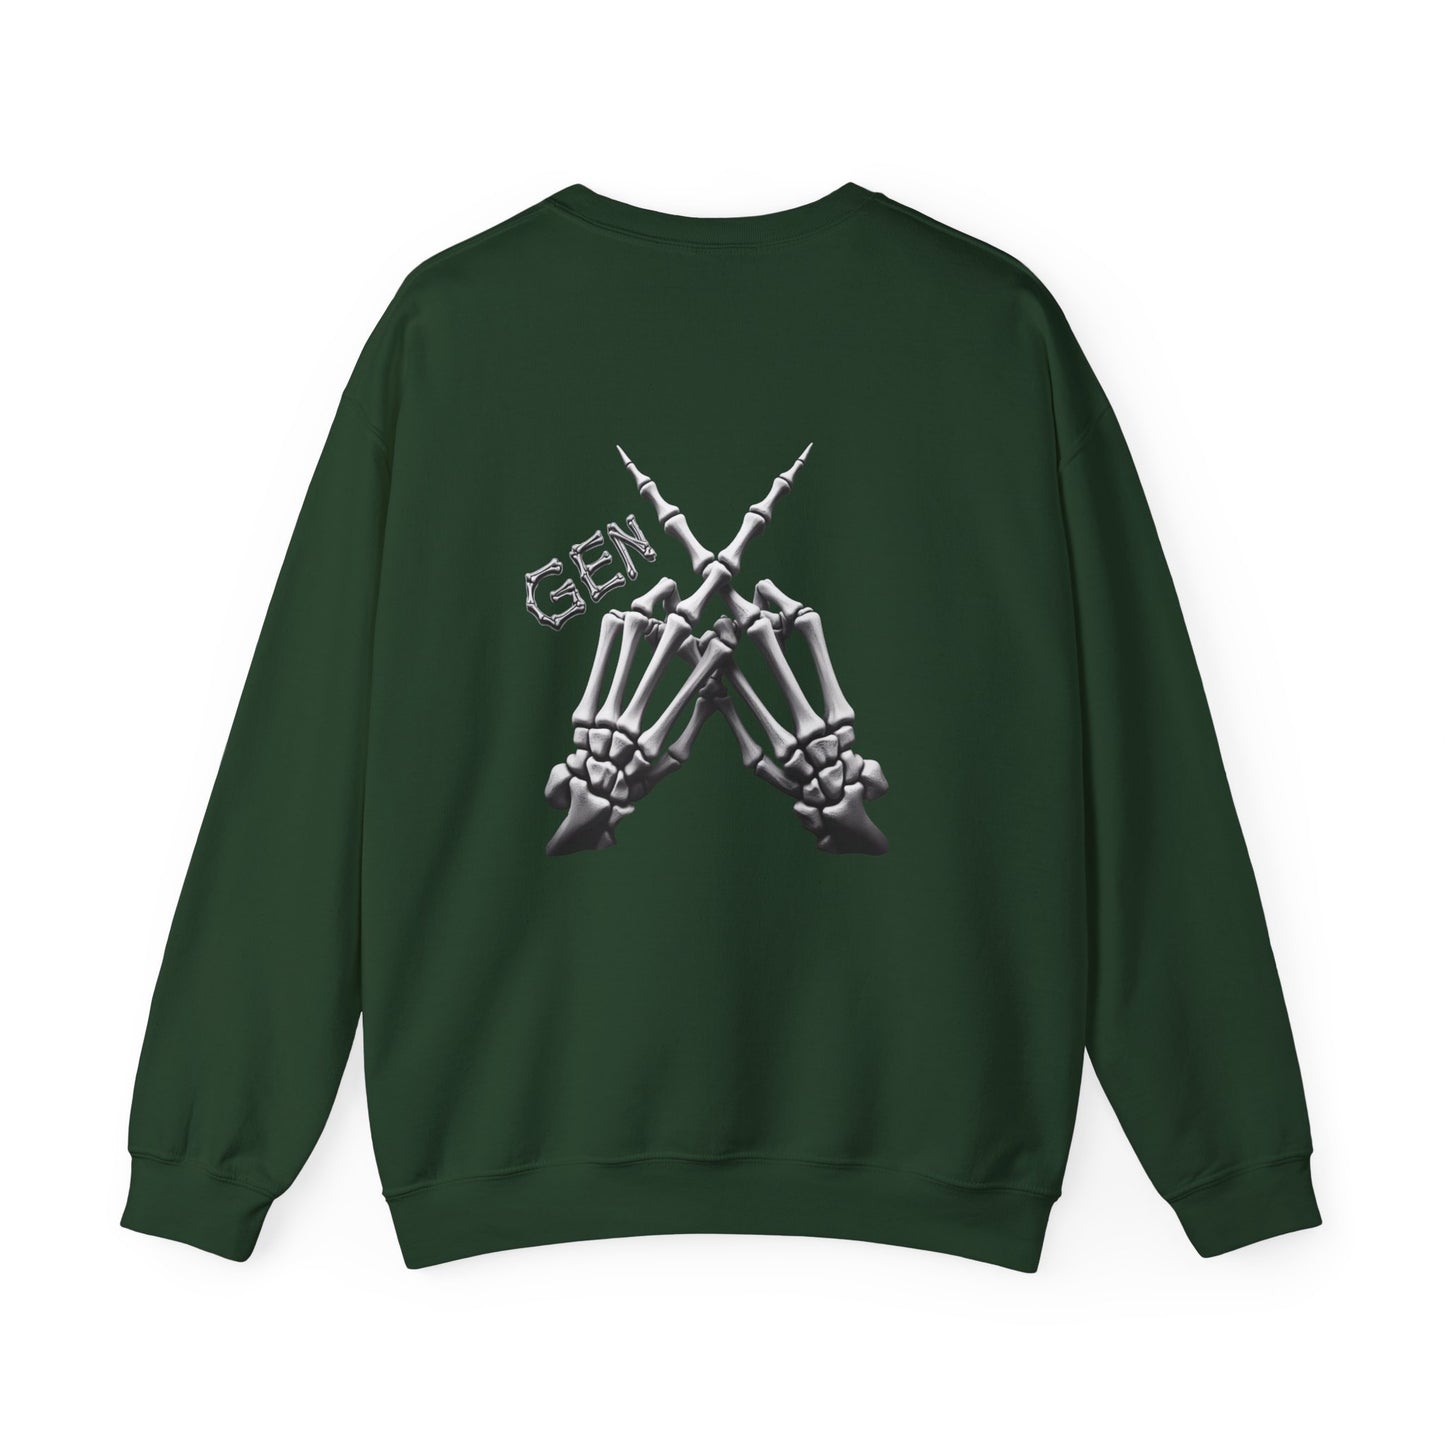 On the front, a skeletal middle finger throws shade (in the most epic way). But wait, there's more! On the back, two skeletal hands form an "X" with the fingers, declaring your place in "Gen X Forever". “Express Your Attitude with the Gen X Forever Hoodie”